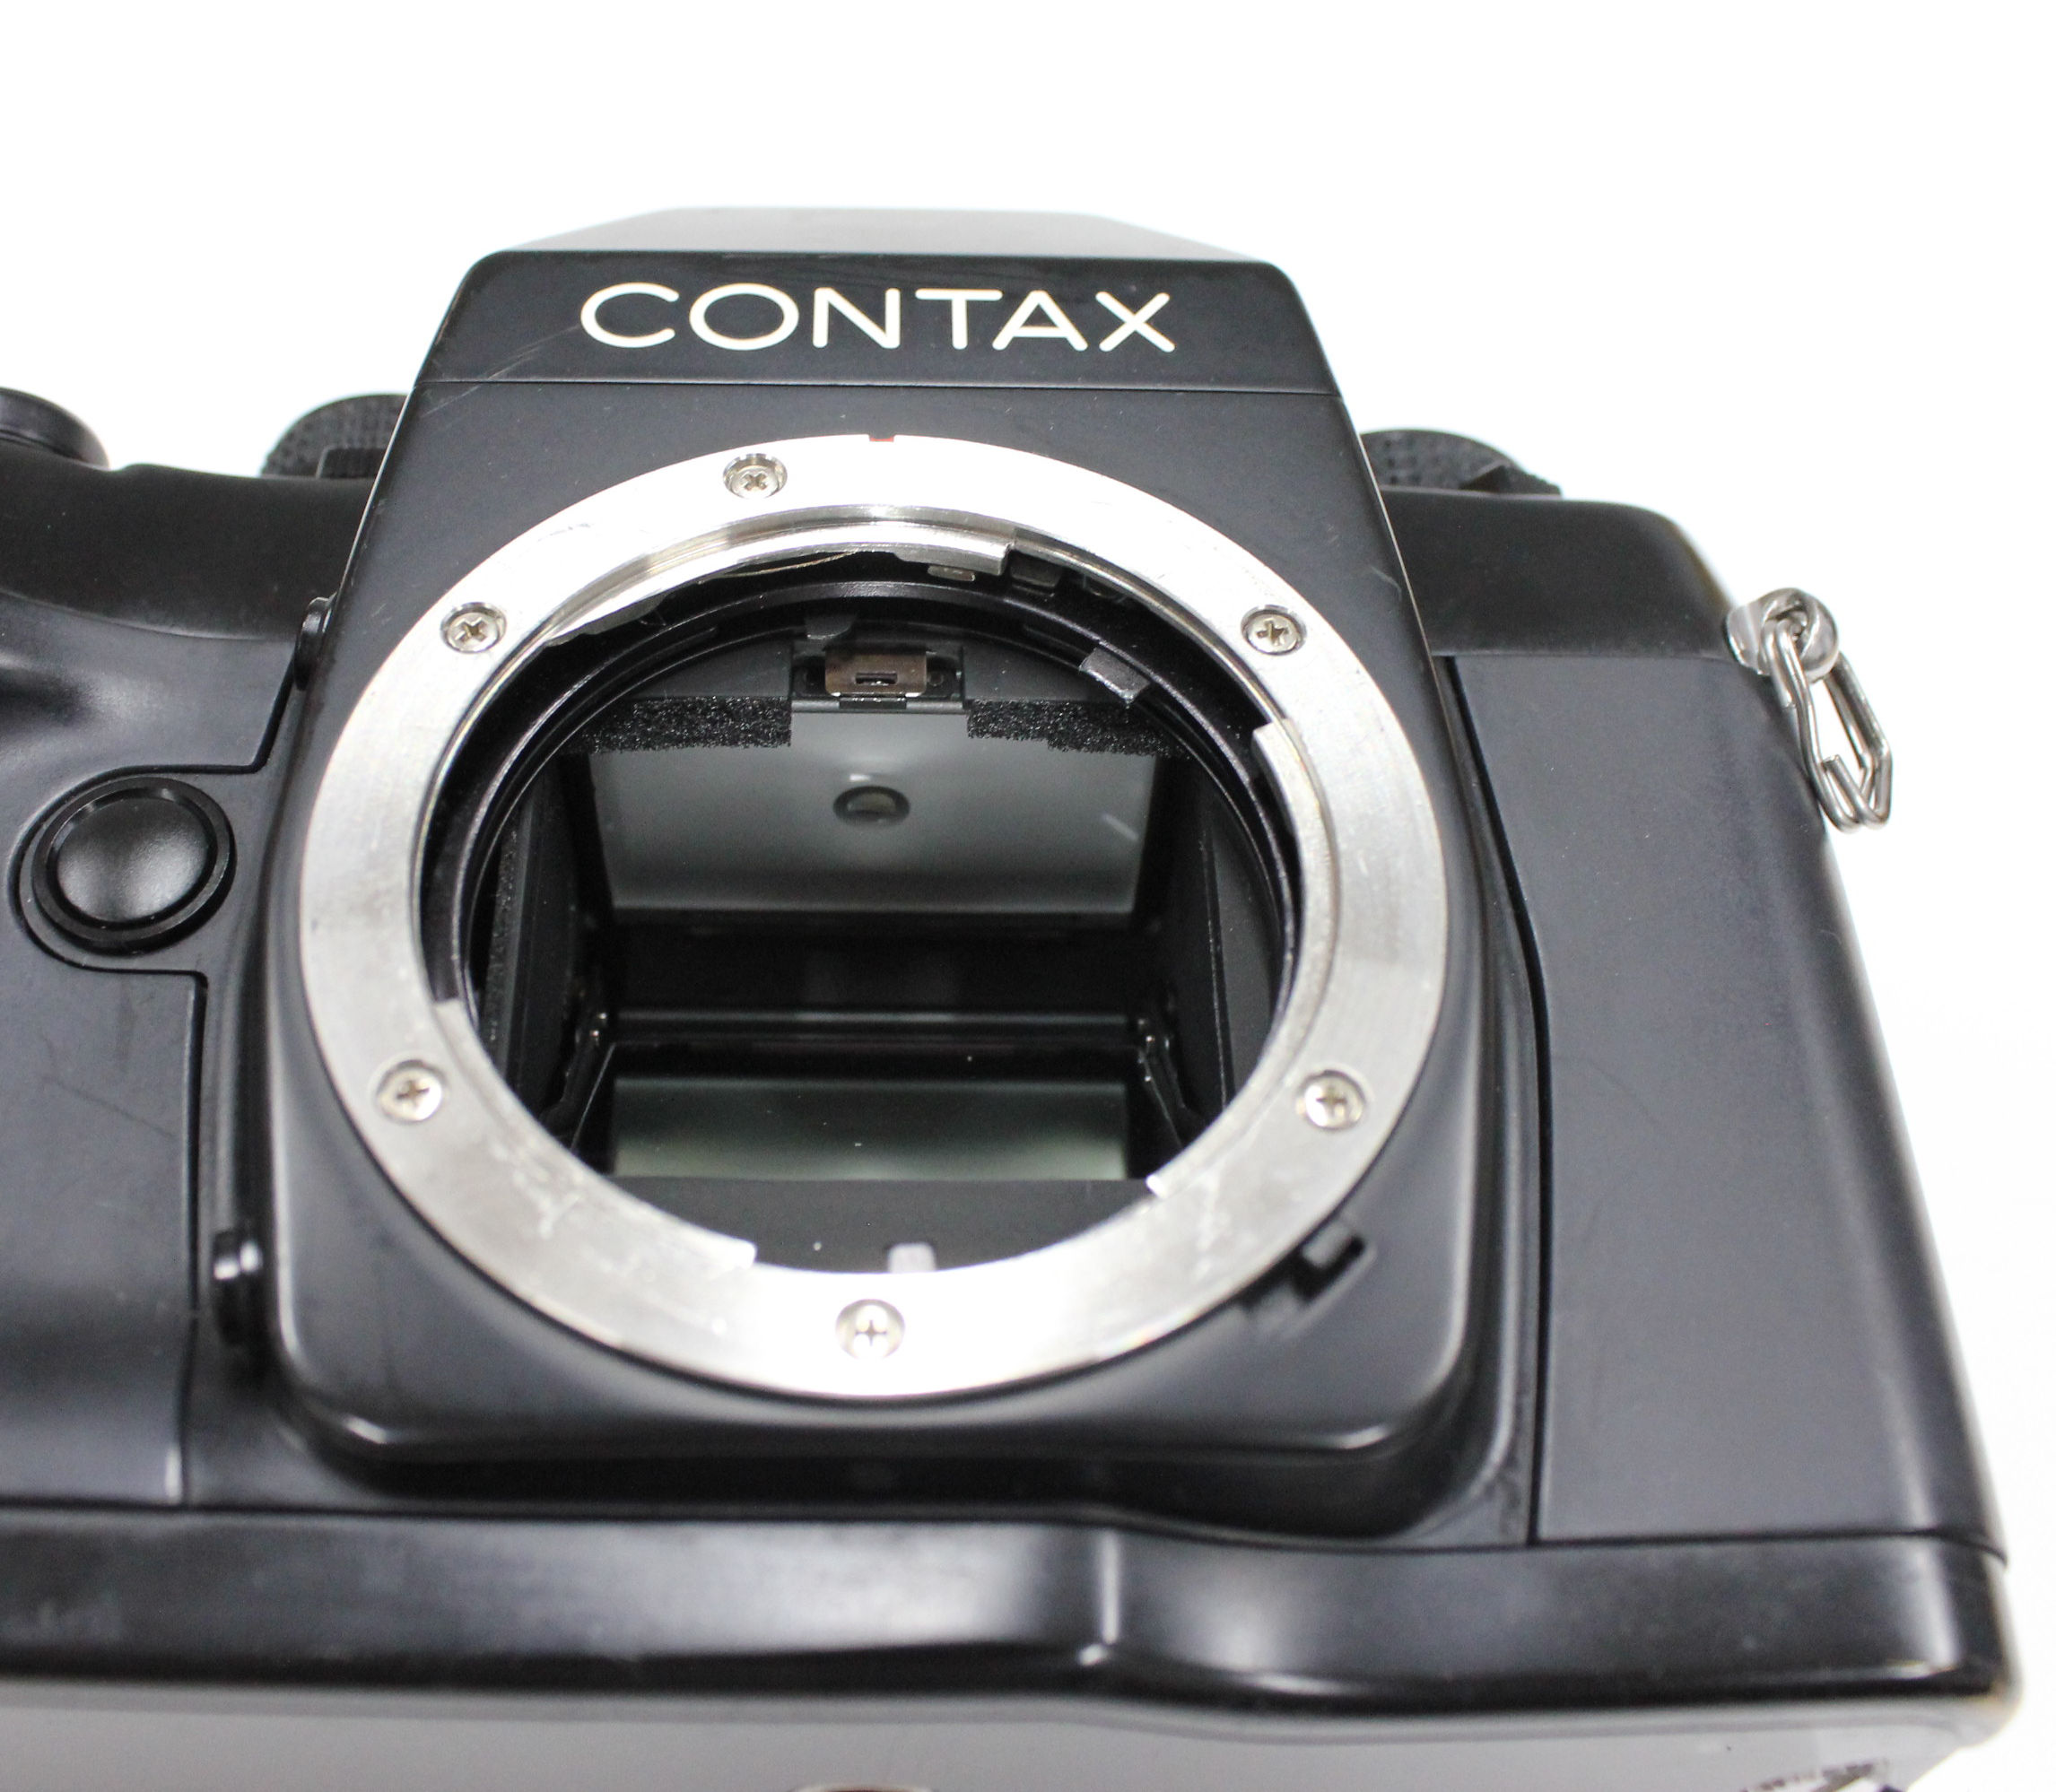  Contax RX 35mm SLR Film Camera Black Body with Box from Japan Photo 9